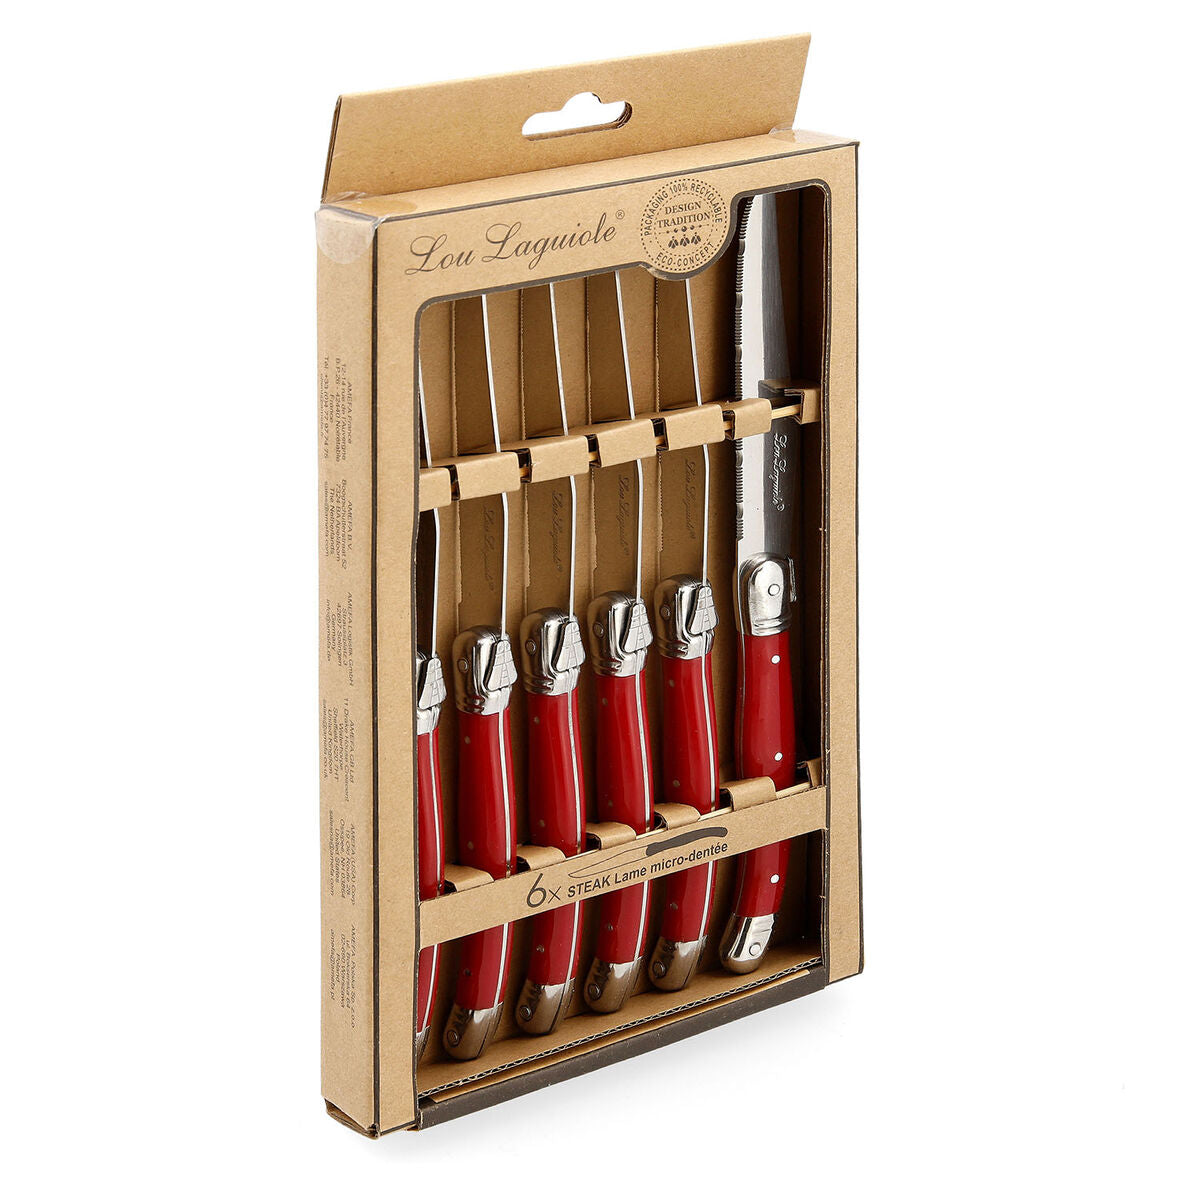 Knife set rustic meats red metal - 6 pieces